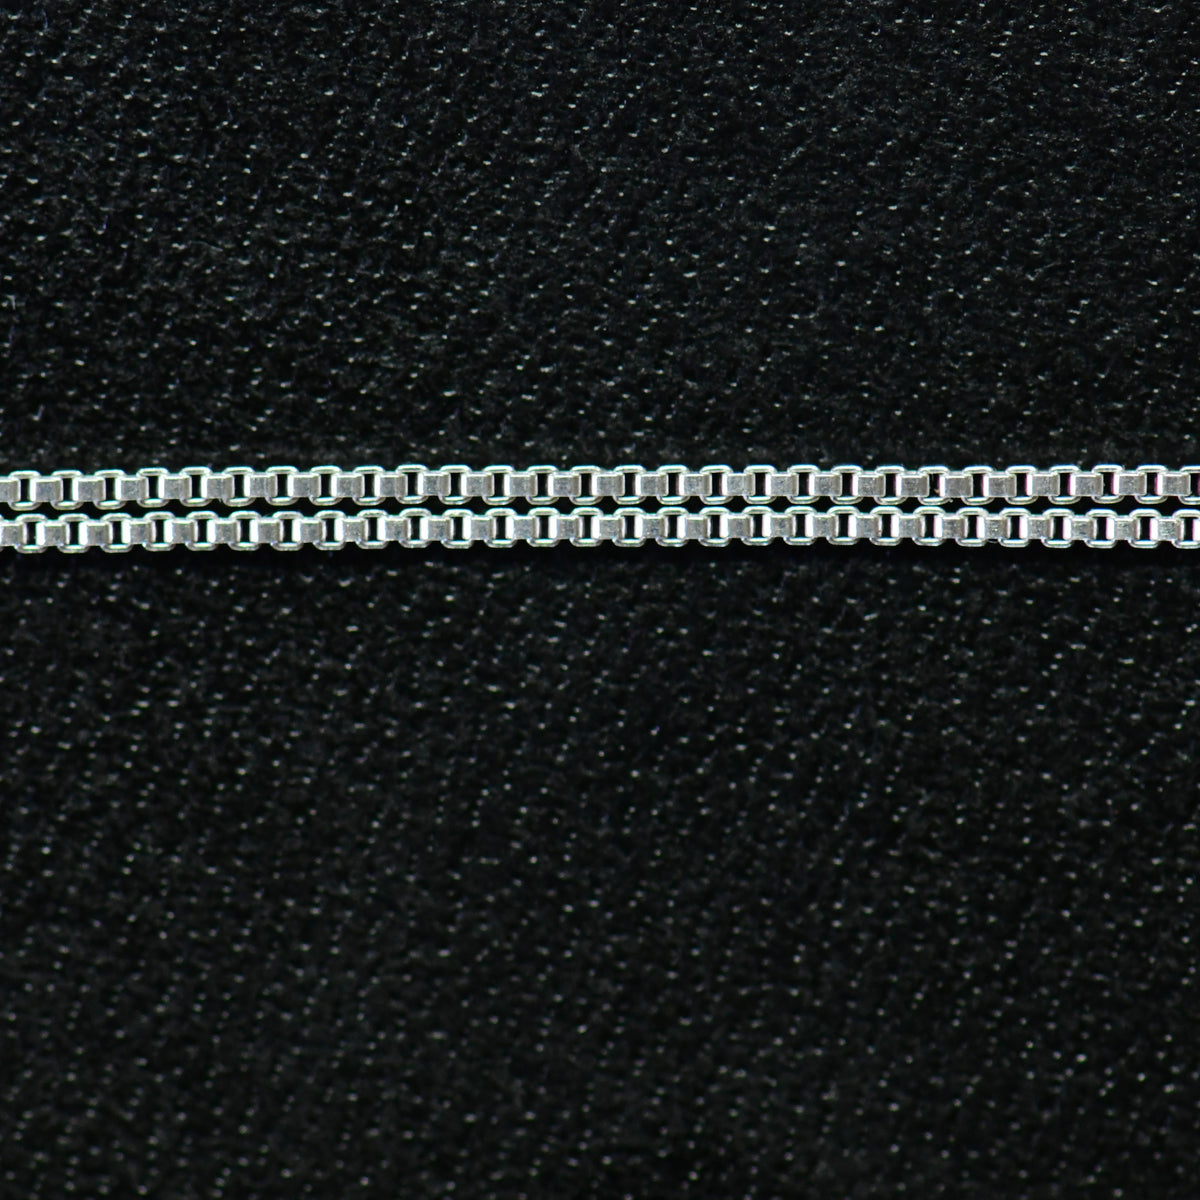 GENUINE 925 STERLING SILVER CHAIN Necklace 50 cm